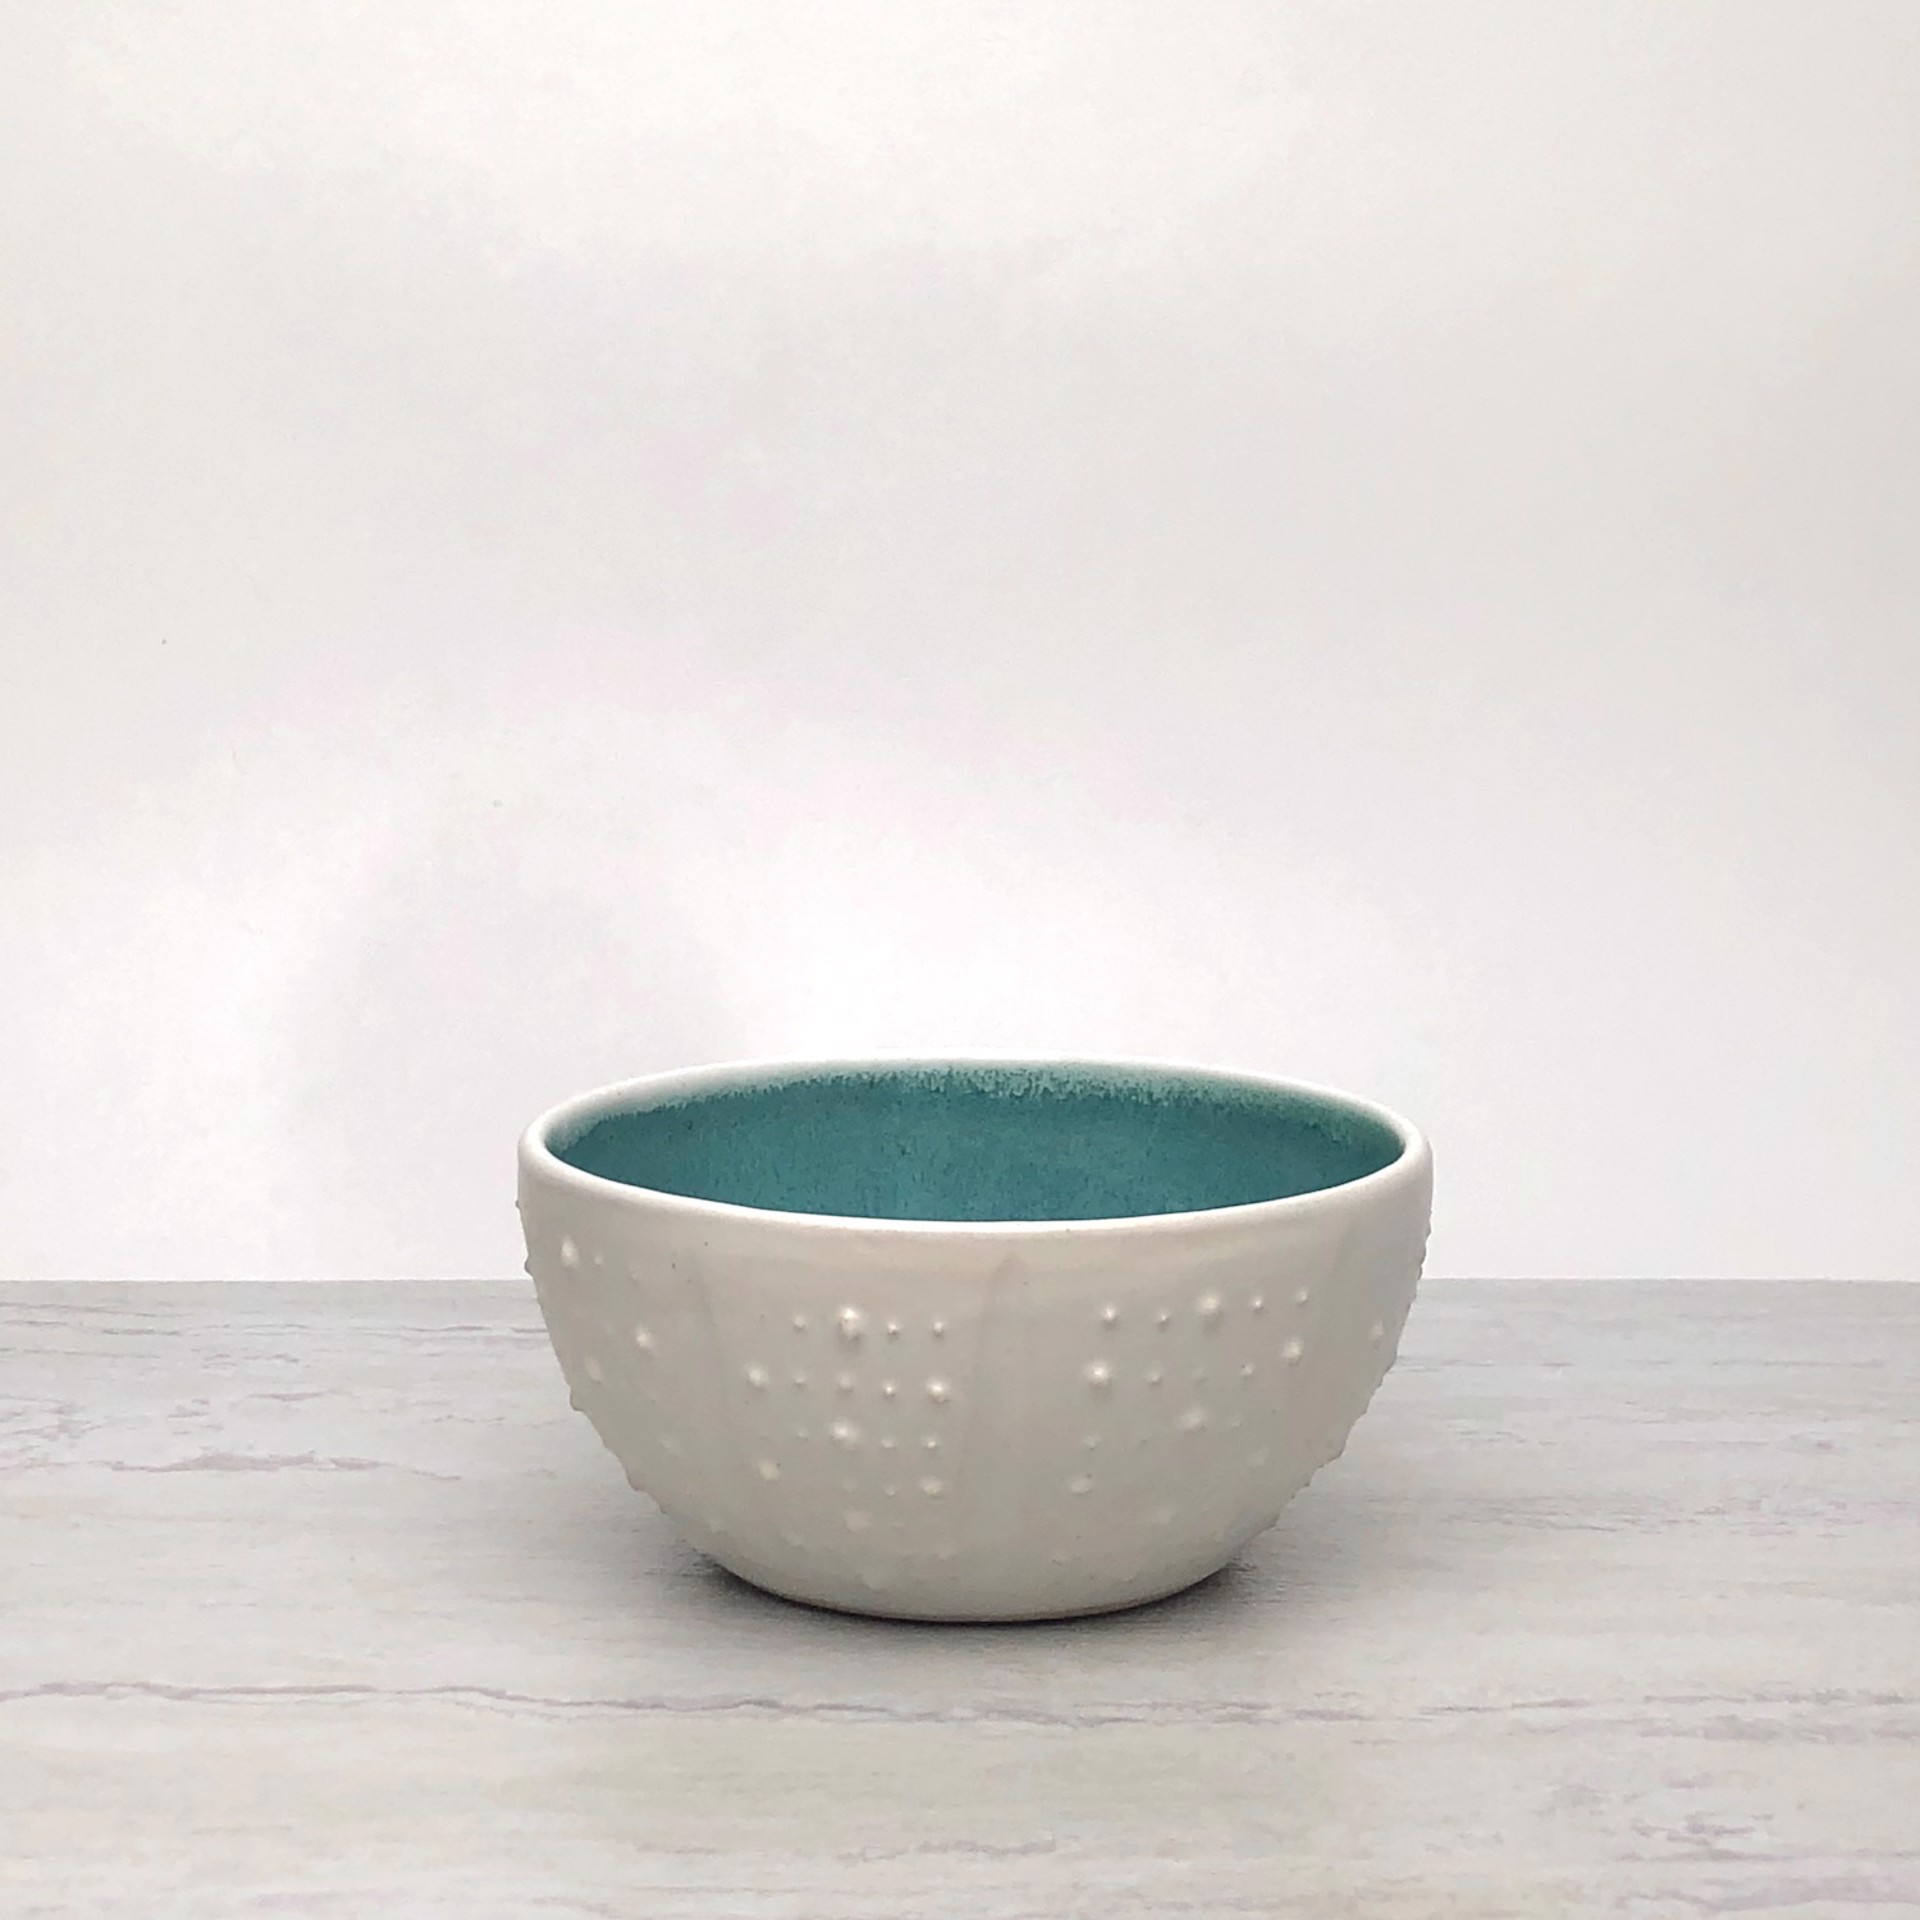 #21 urchin cereal bowl by Leah Streetman